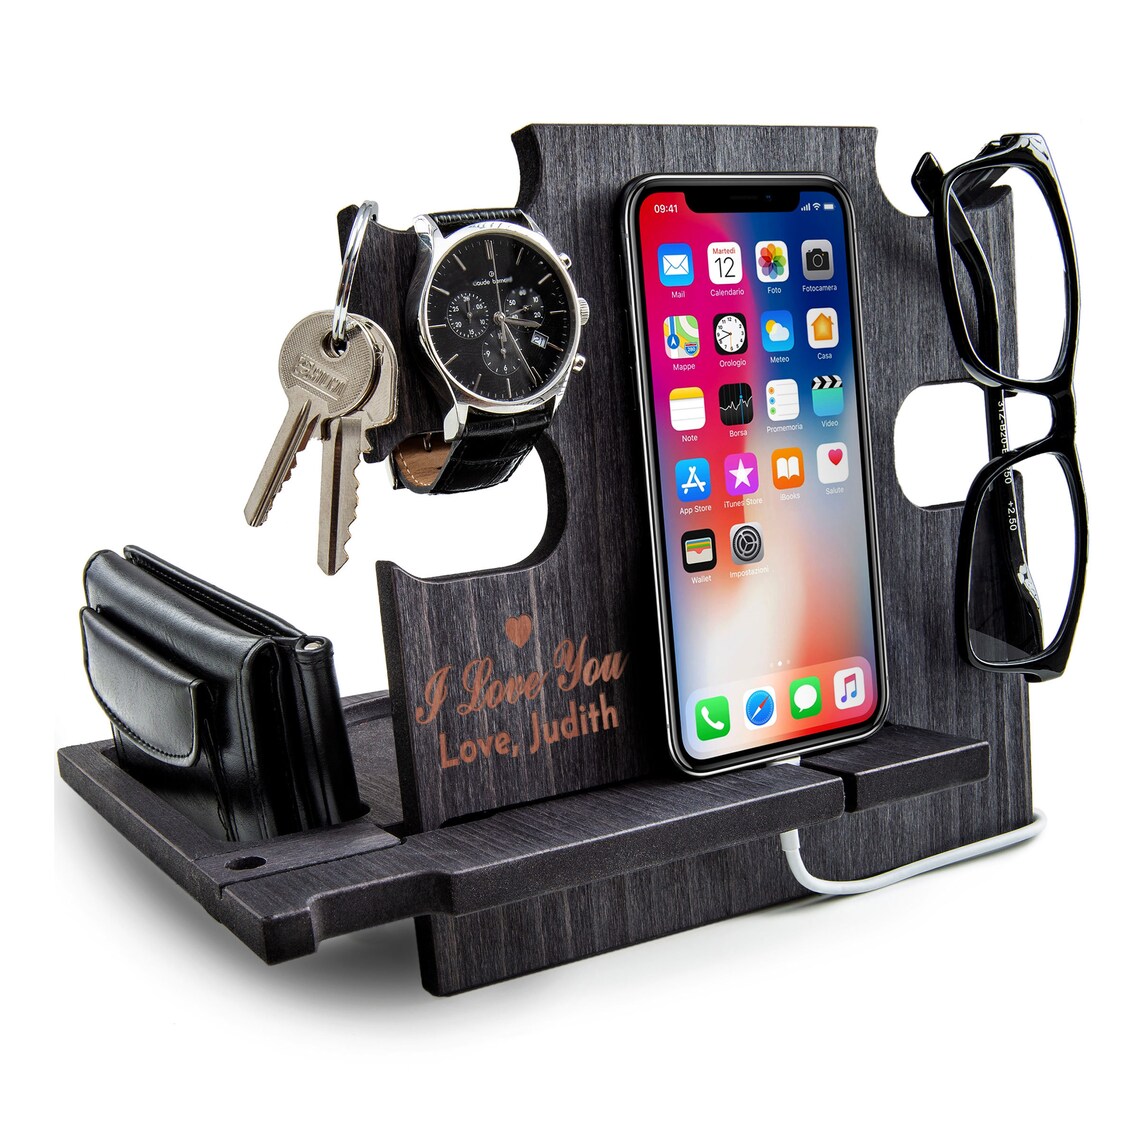 Docking Station dating gift ideas for him